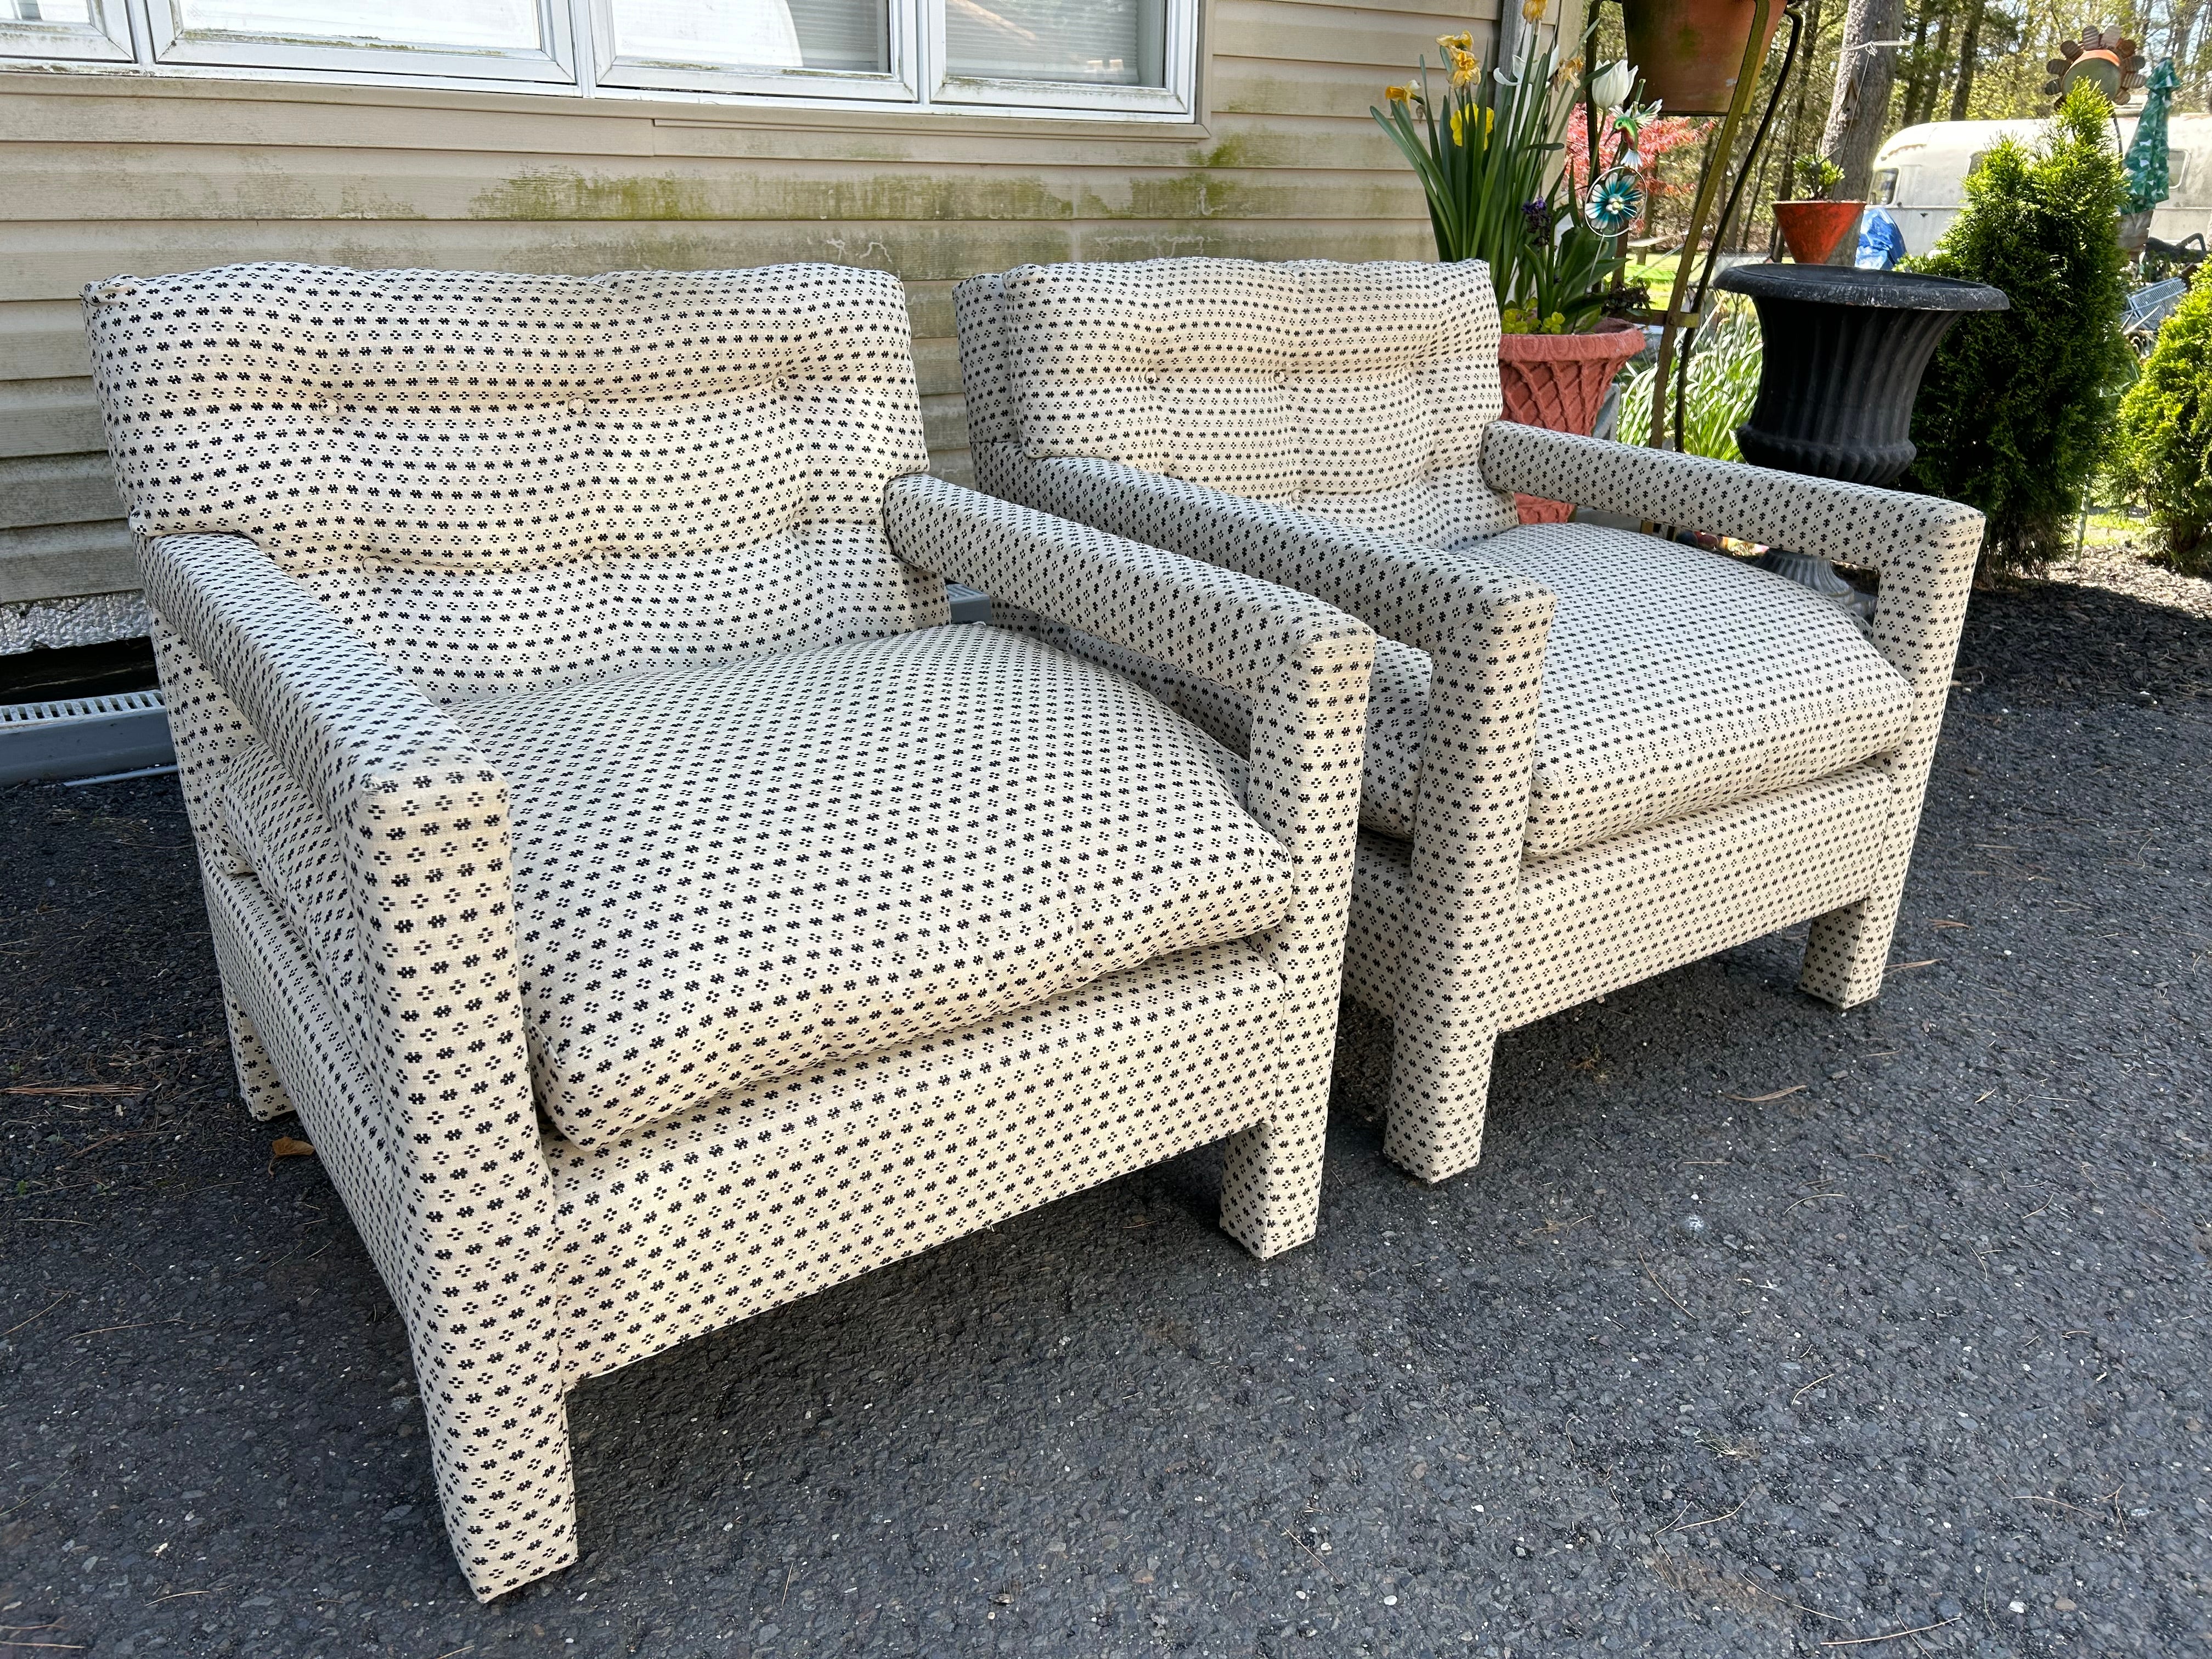 A lovely classic matching pair of fully upholstered Milo Baughman parsons chairs. Nice deep sitting comfy chairs. Upholstery has been redone in the past in a homespun woven fabric which does show a bit of wear-see photos.  The foam and padding are